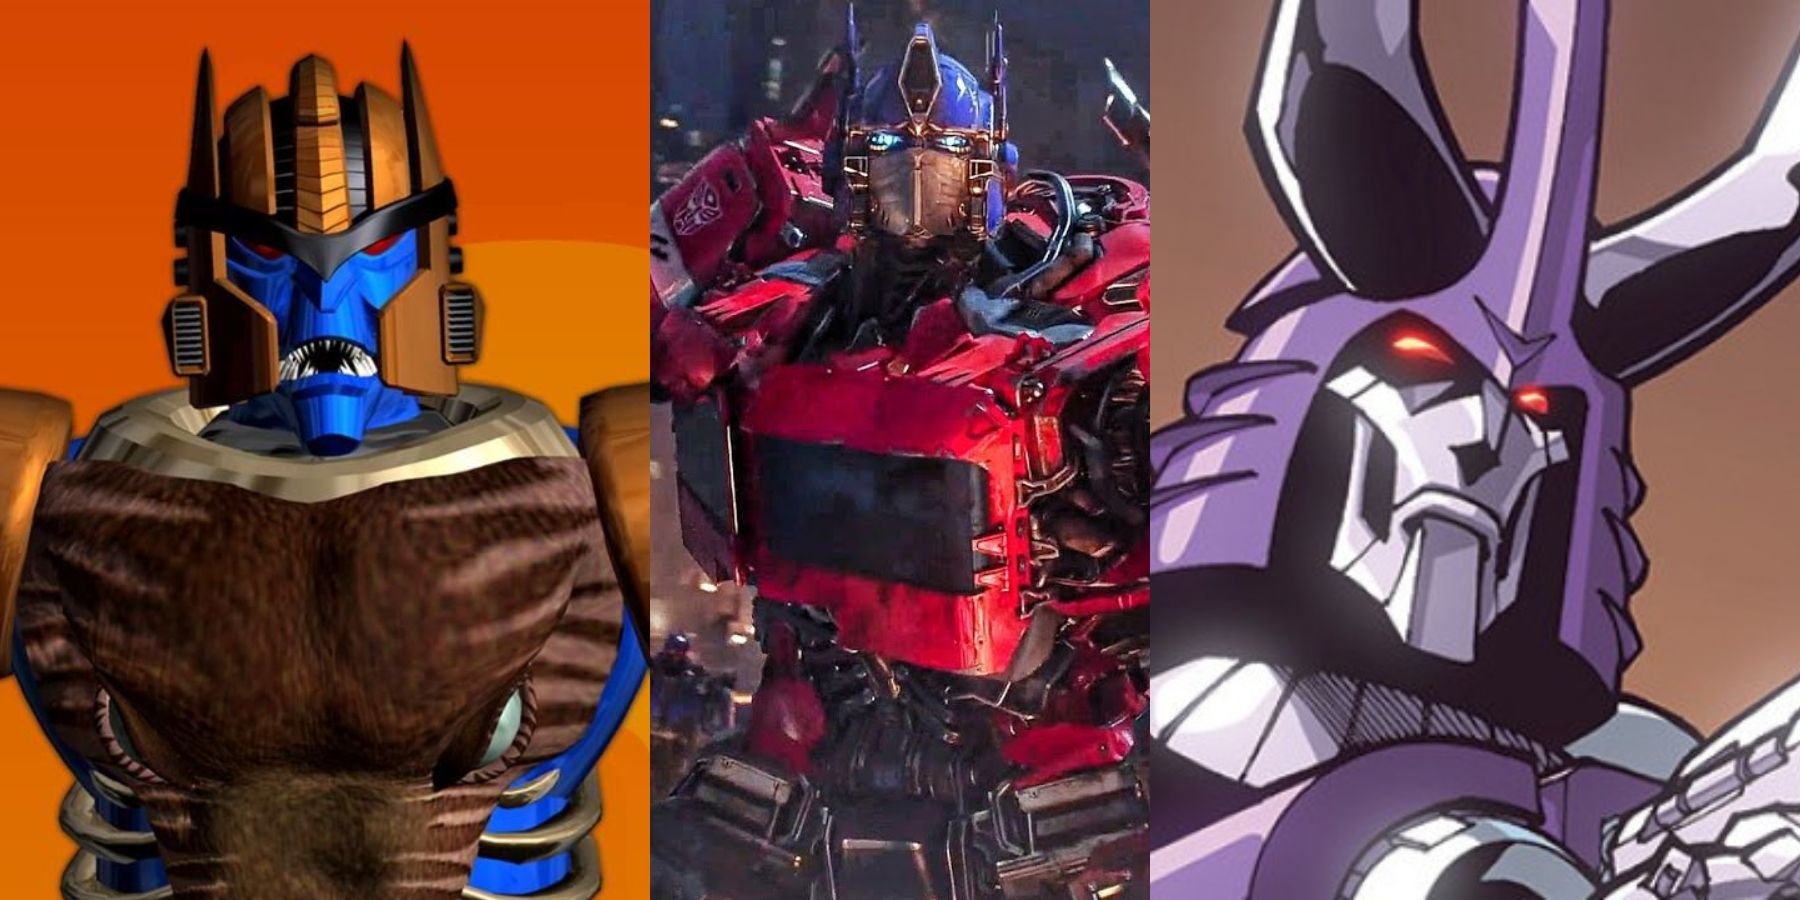 transformers 4 rise of galvatron cast